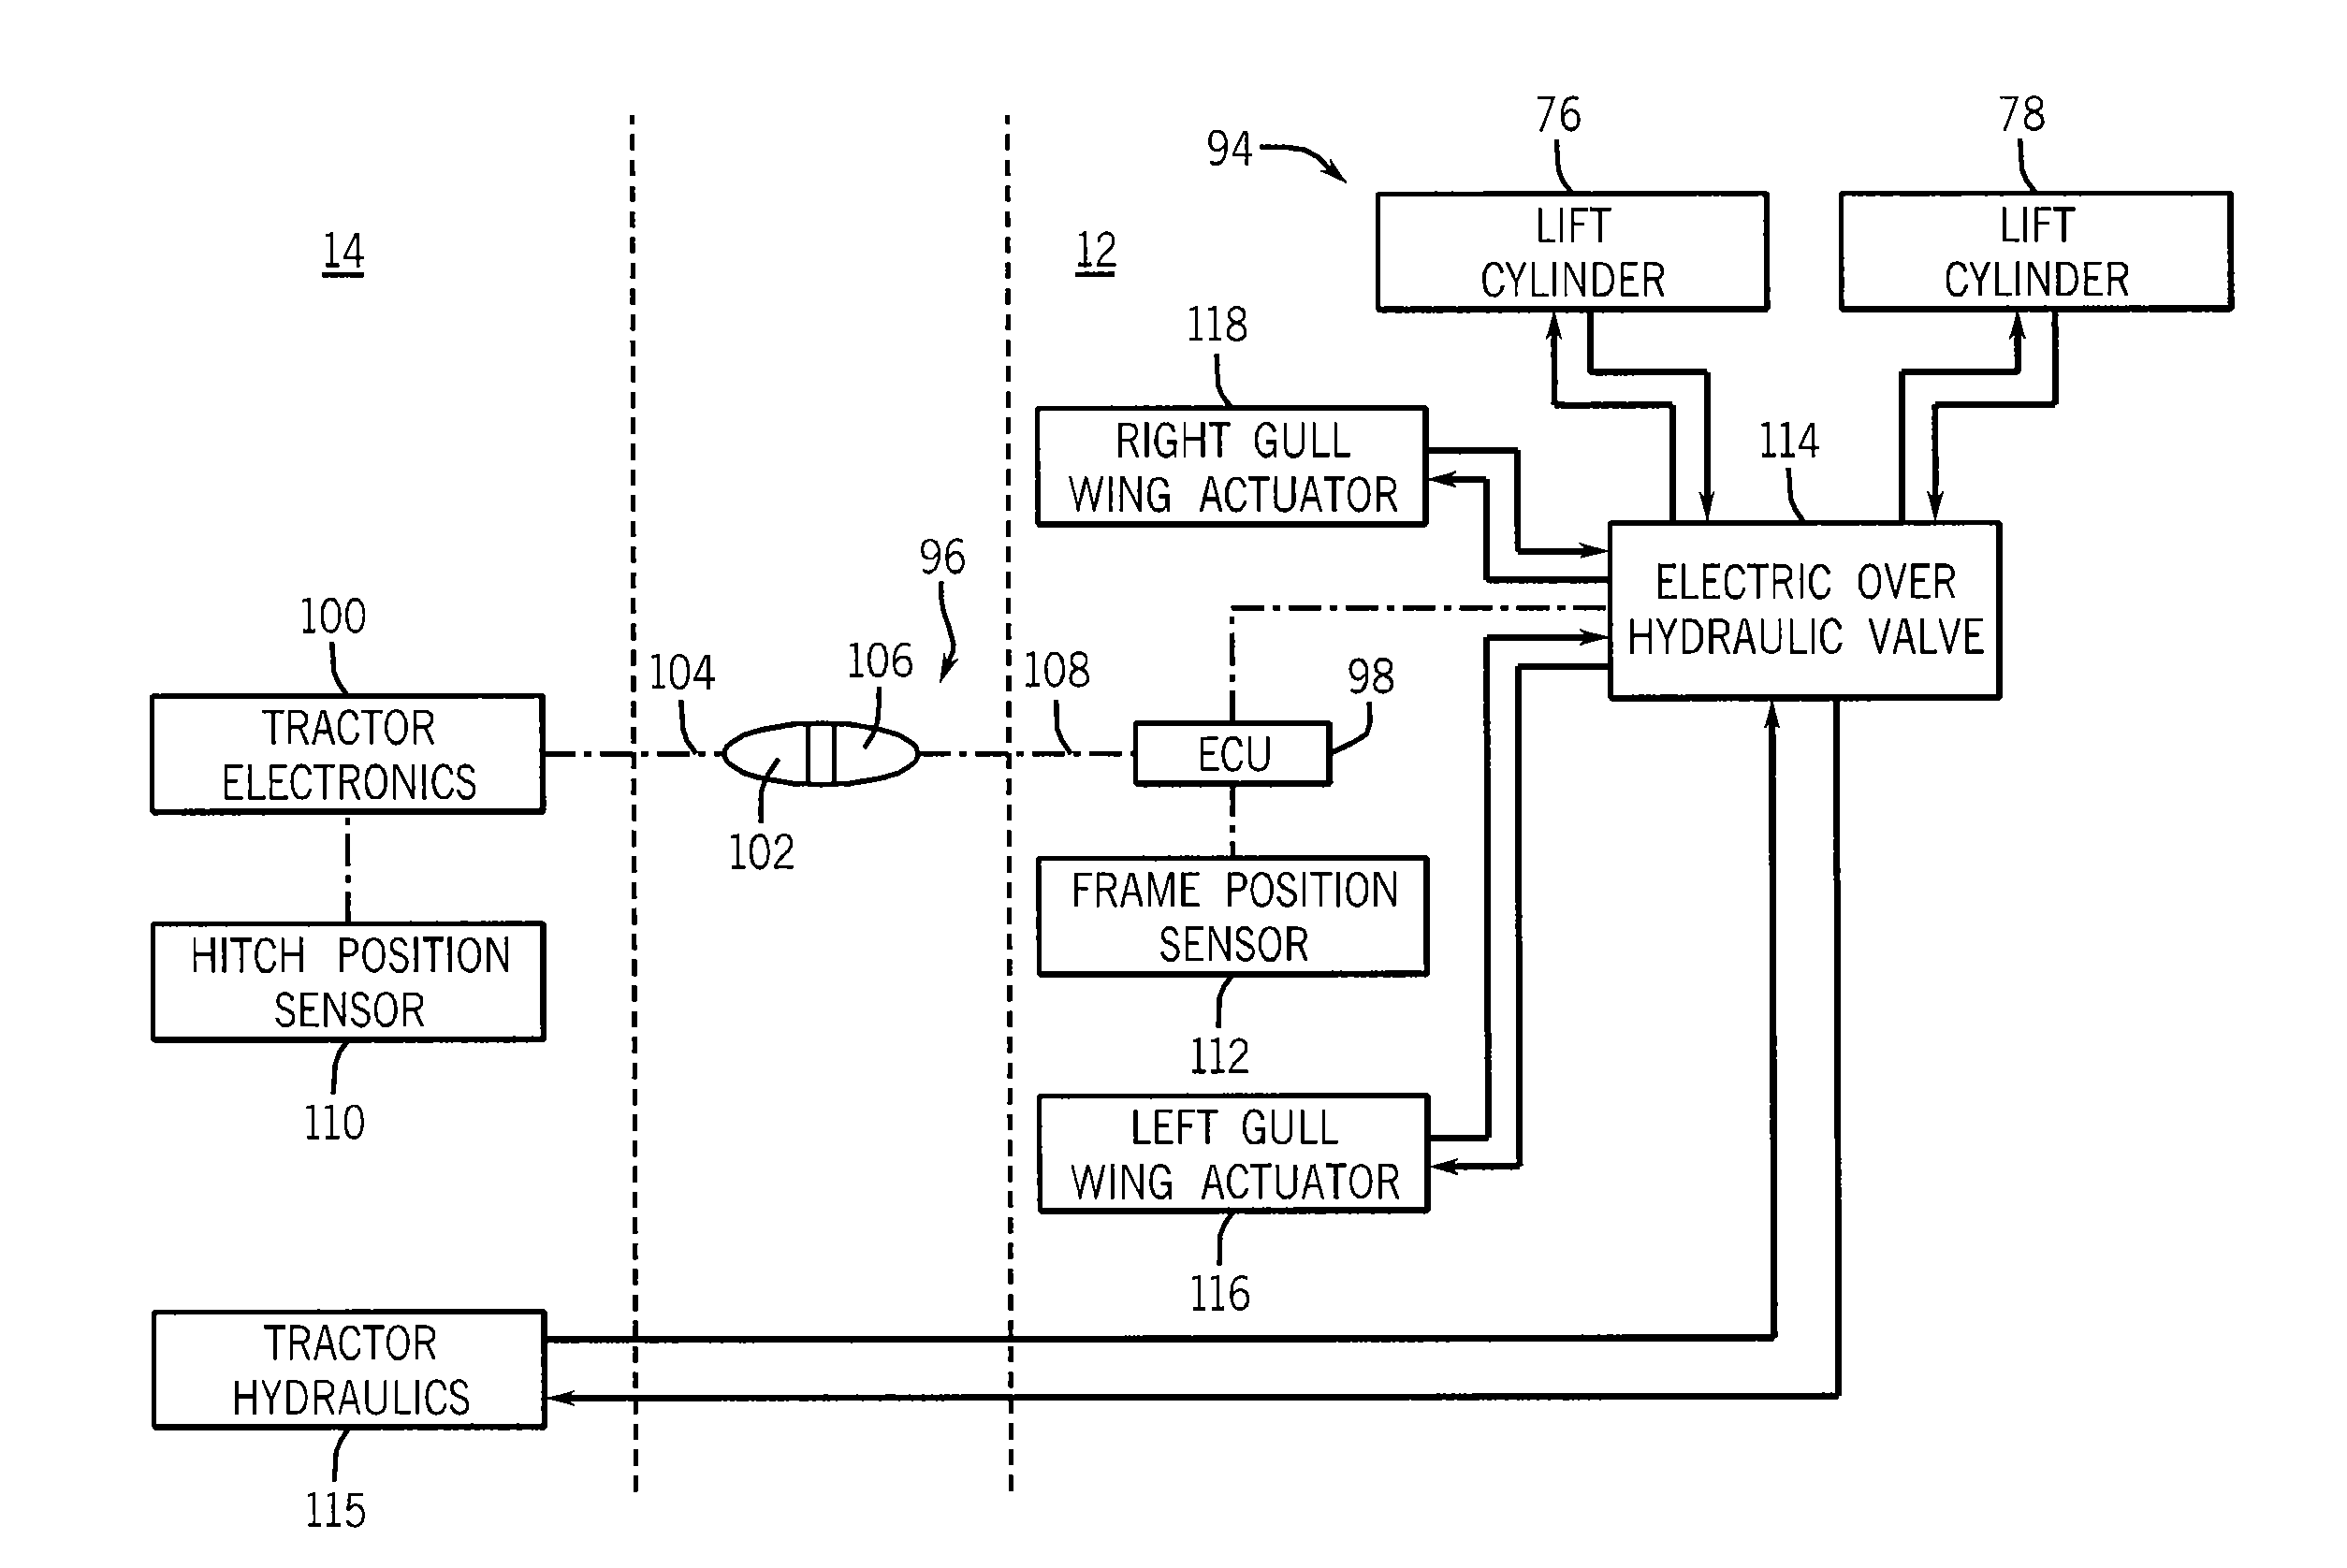 Method And Apparatus For Implement Control Of Tractor Hydraulics Via Isobus Connection